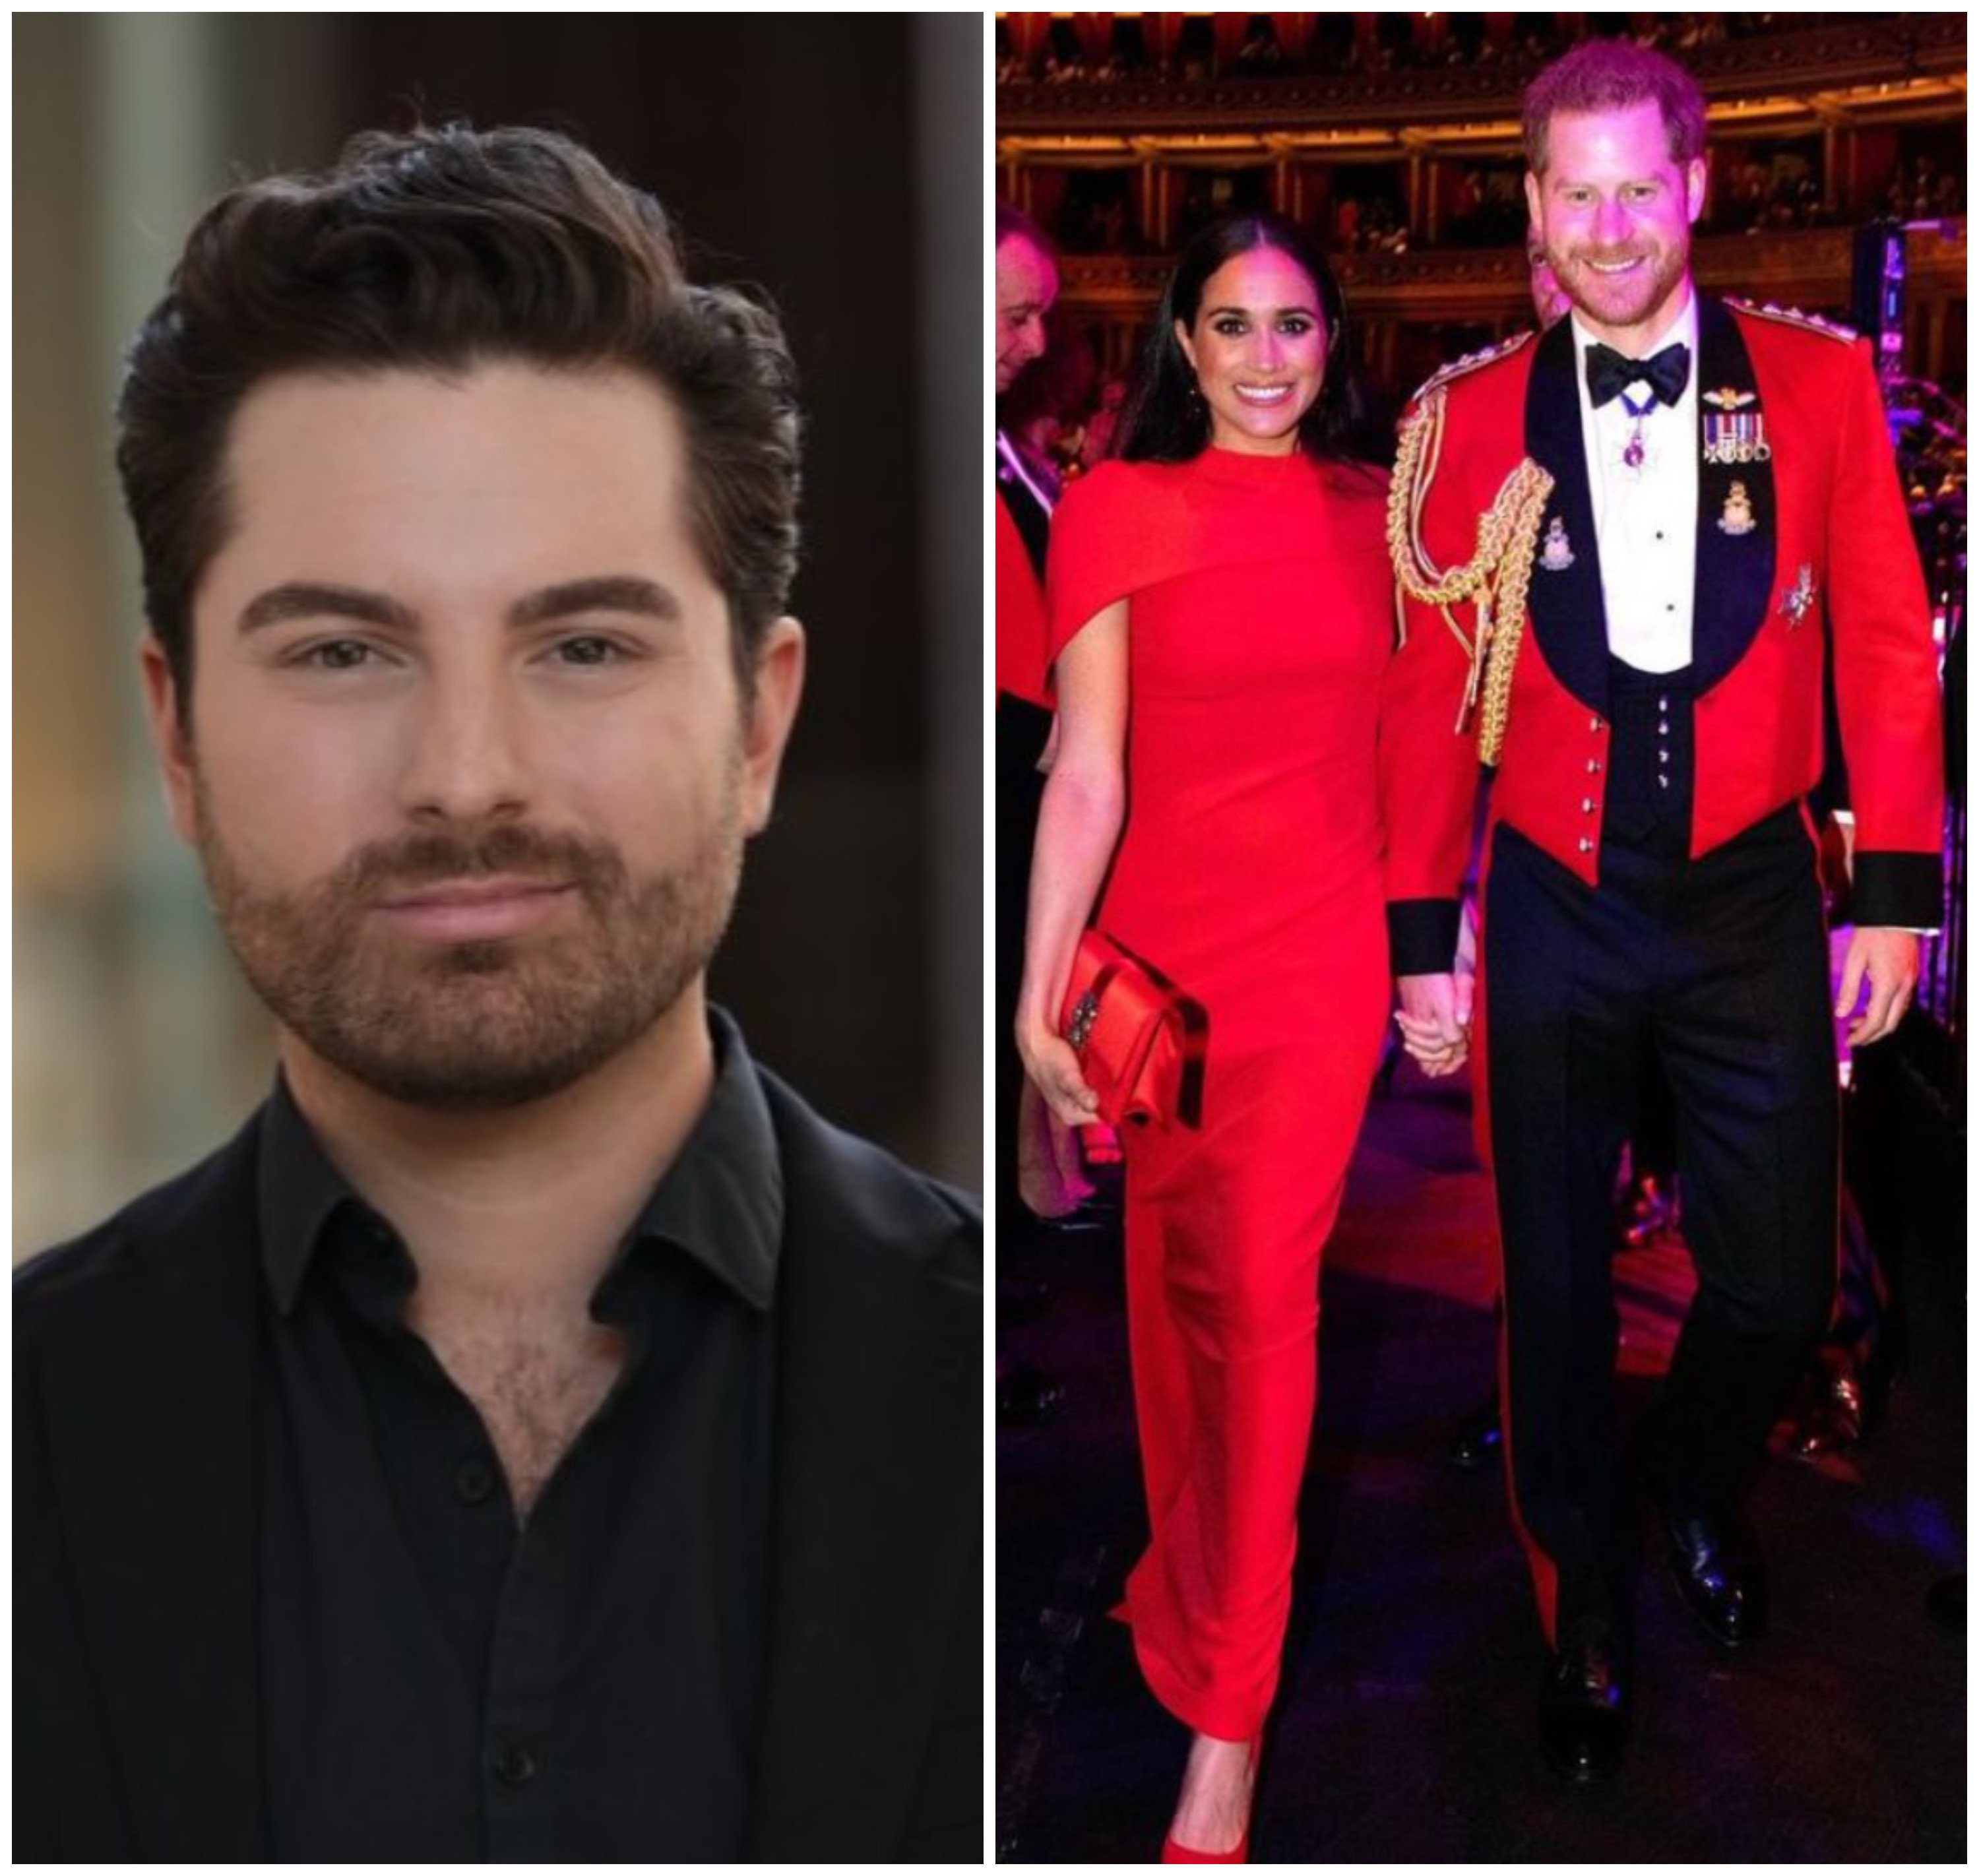 Meghan Markle and Prince Harry recruited Hollywood’s finest communications talent Kyle Boulia for their personal rebrand. Photos: Kyle Boulia/LinkedIn, @sussexroyal/Instagram